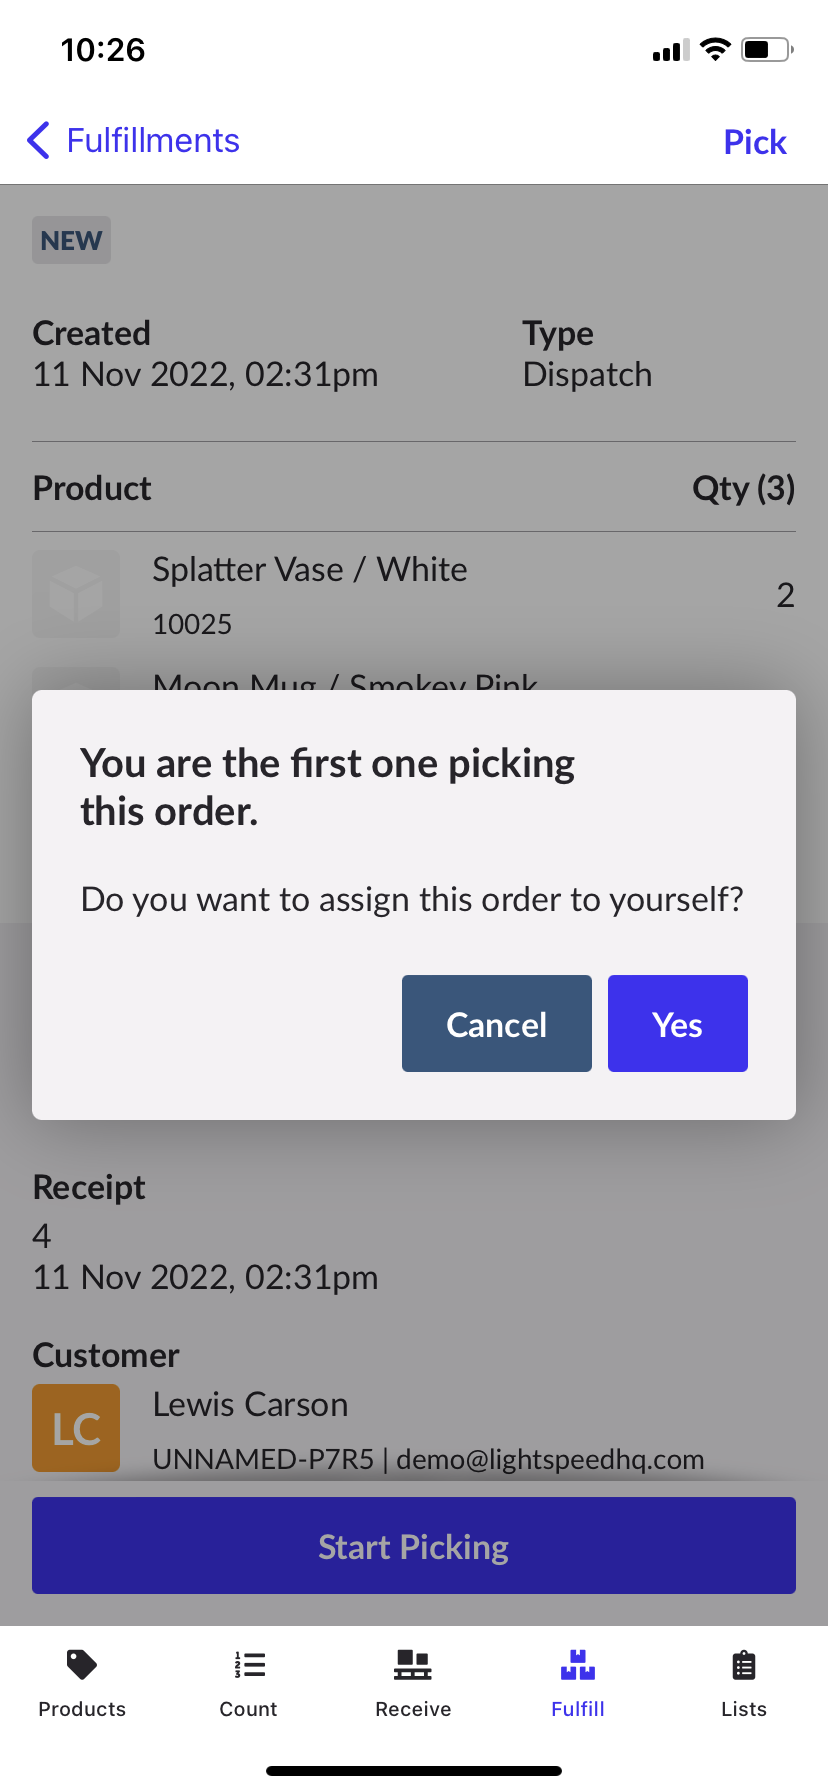 Pop up box to assign the fulfillment. Options to select yes or cancel.